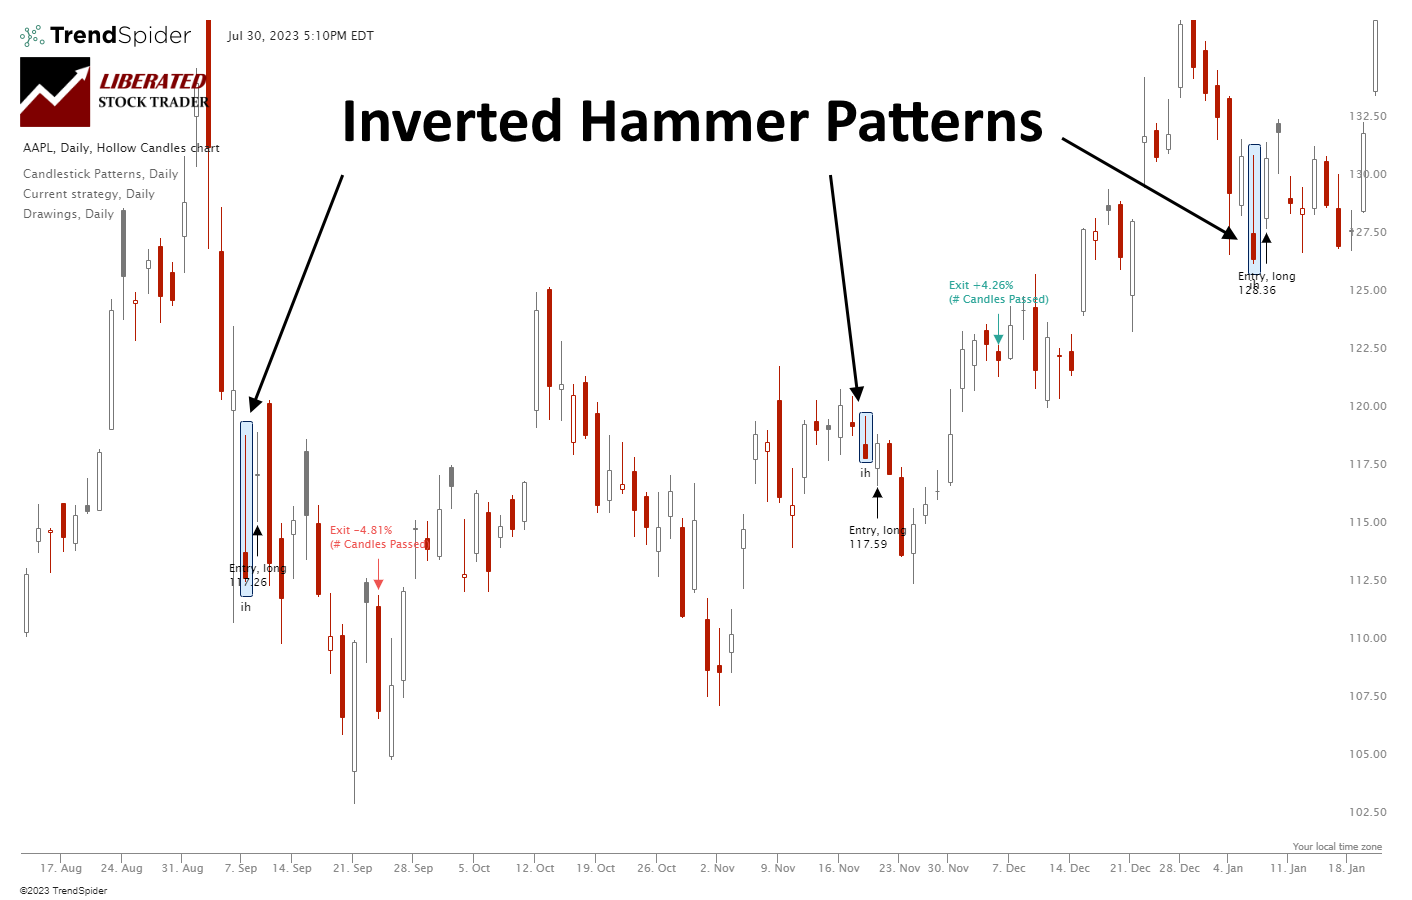 Inverted Hammer Pattern: Is it the Best Candlestick?